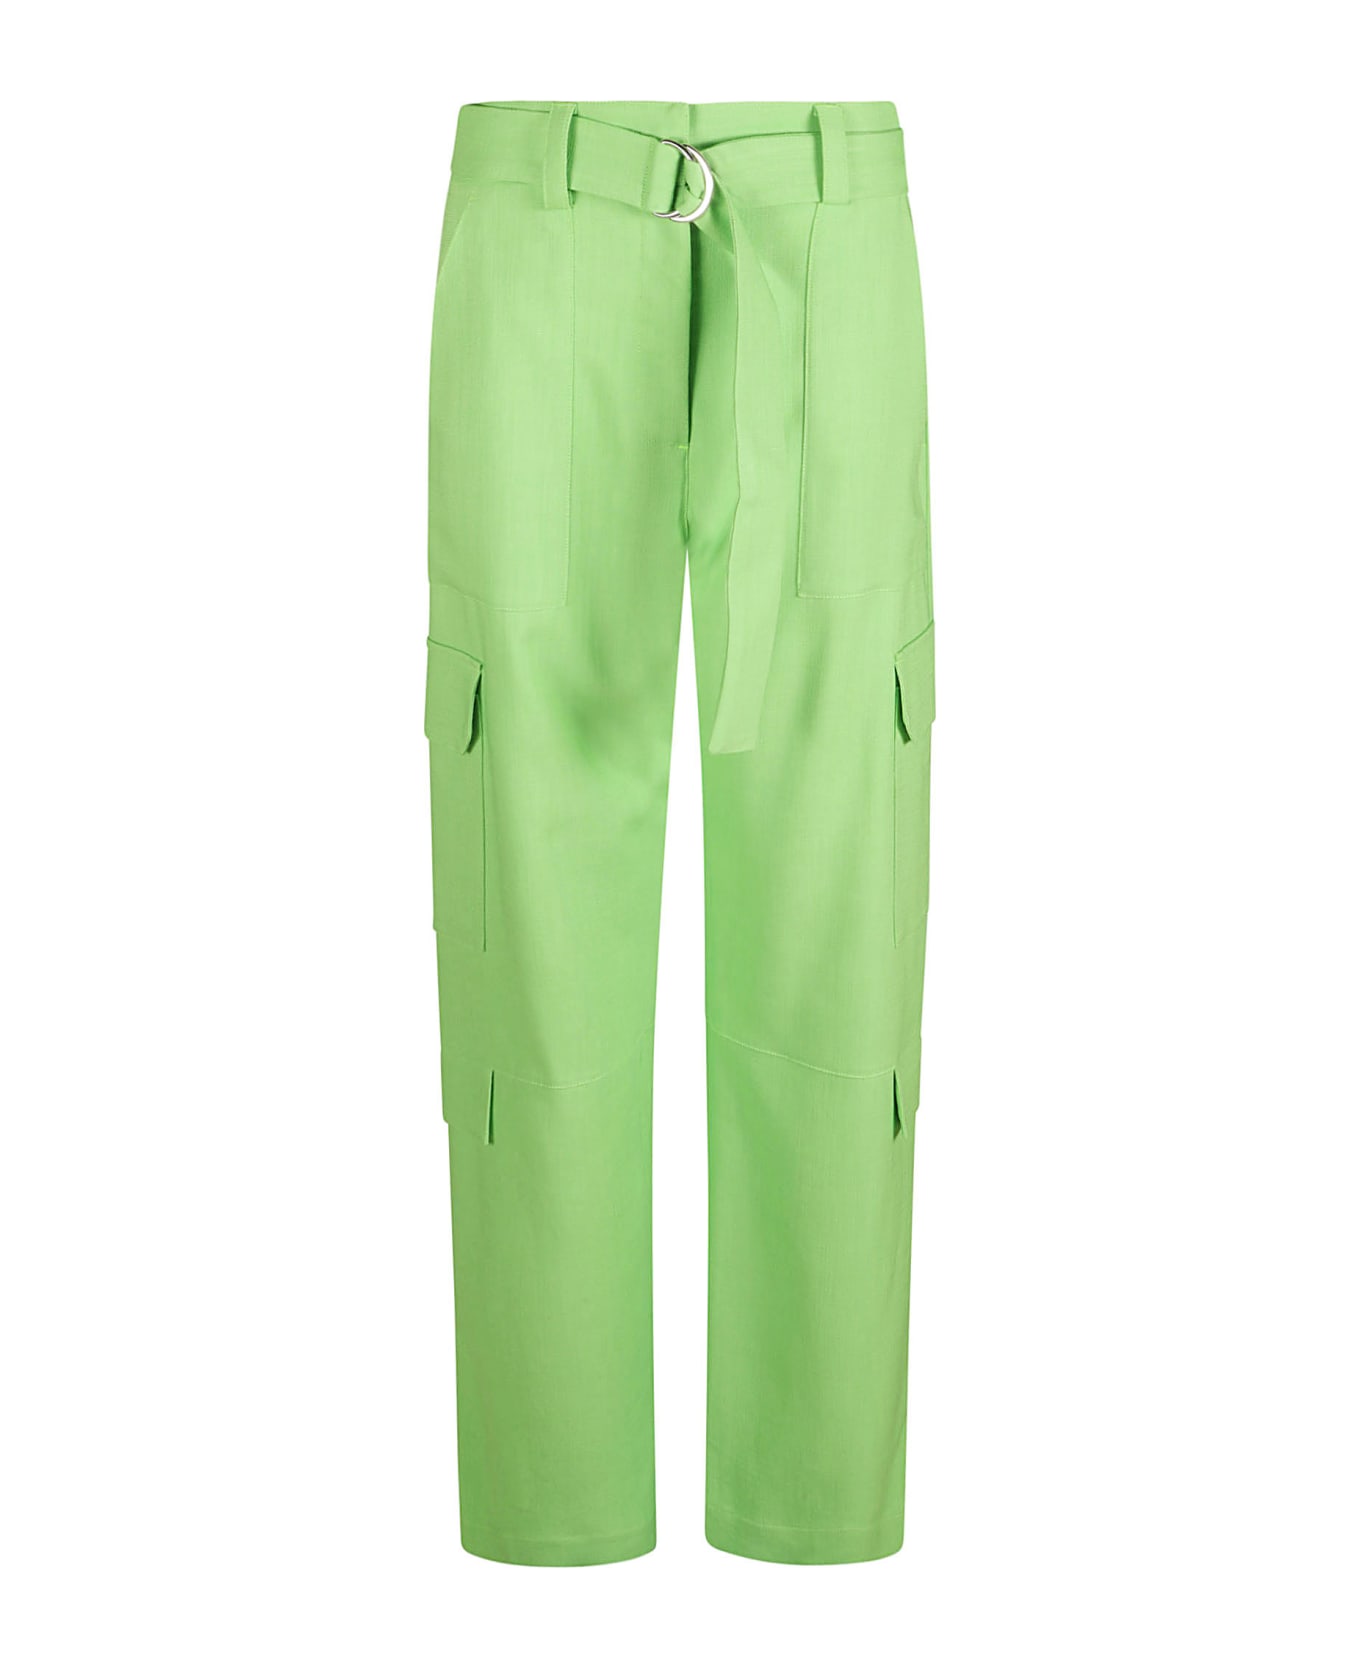 MSGM Belted Cargo Trousers - Acid Green ボトムス